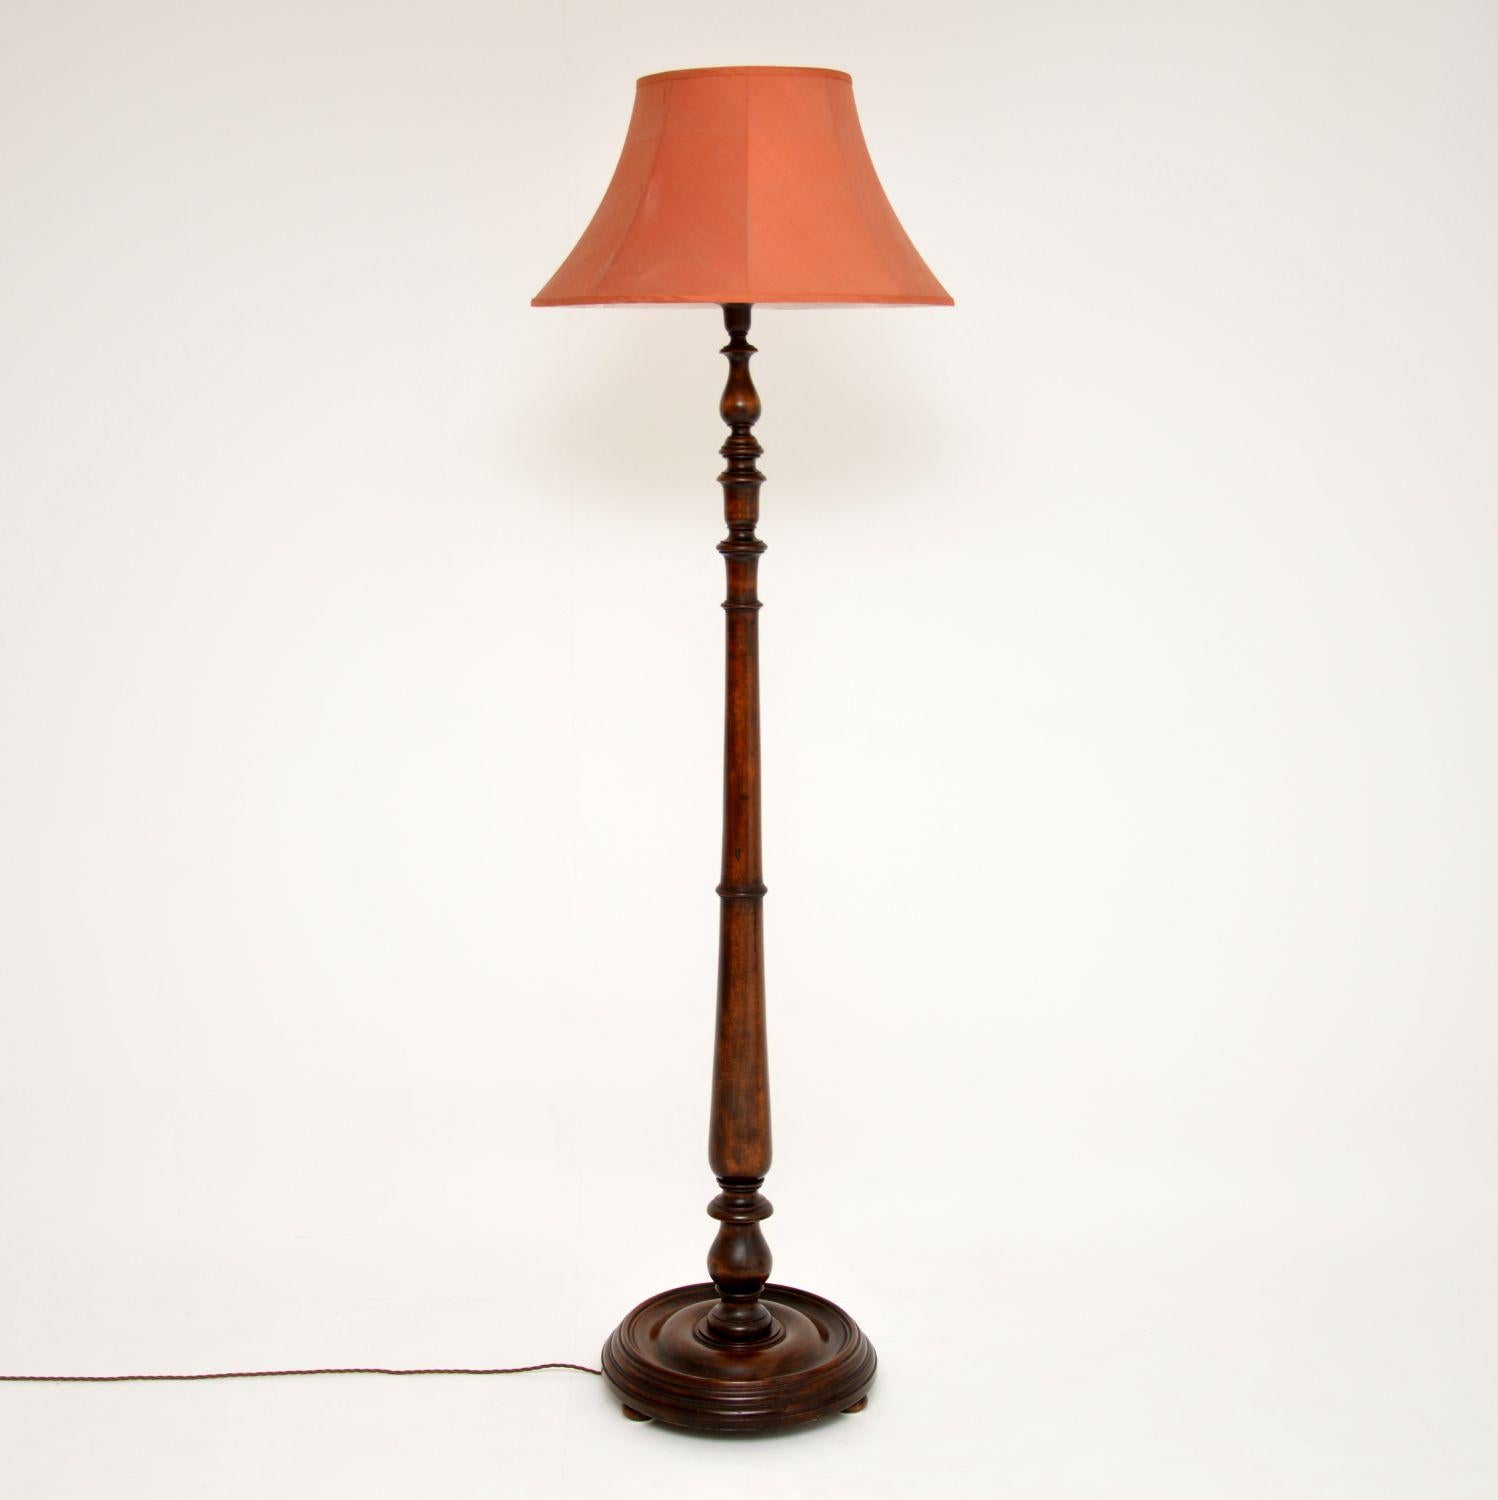 Antique Victorian solid mahogany floor lamp in excellent original condition & in working order, having just been re-wired with gold flex. This lamp stand dates from around the 1890 period. The wood is nicely turned all the way down & on the base.